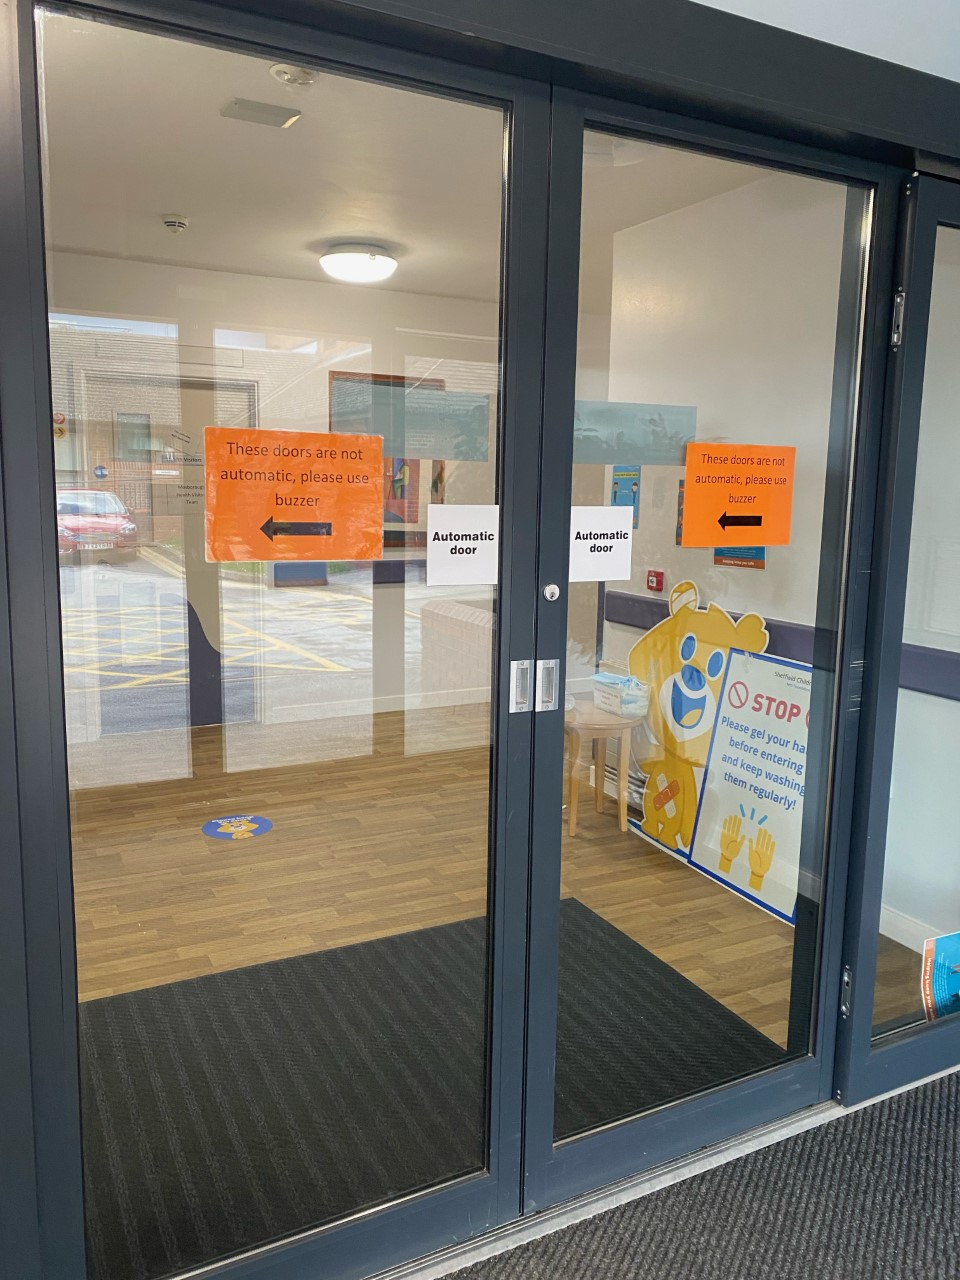 Photograph of set of doors with orange signs in windows saying 'These doors are automatic, please use buzzer' with an arrow pointing to the left